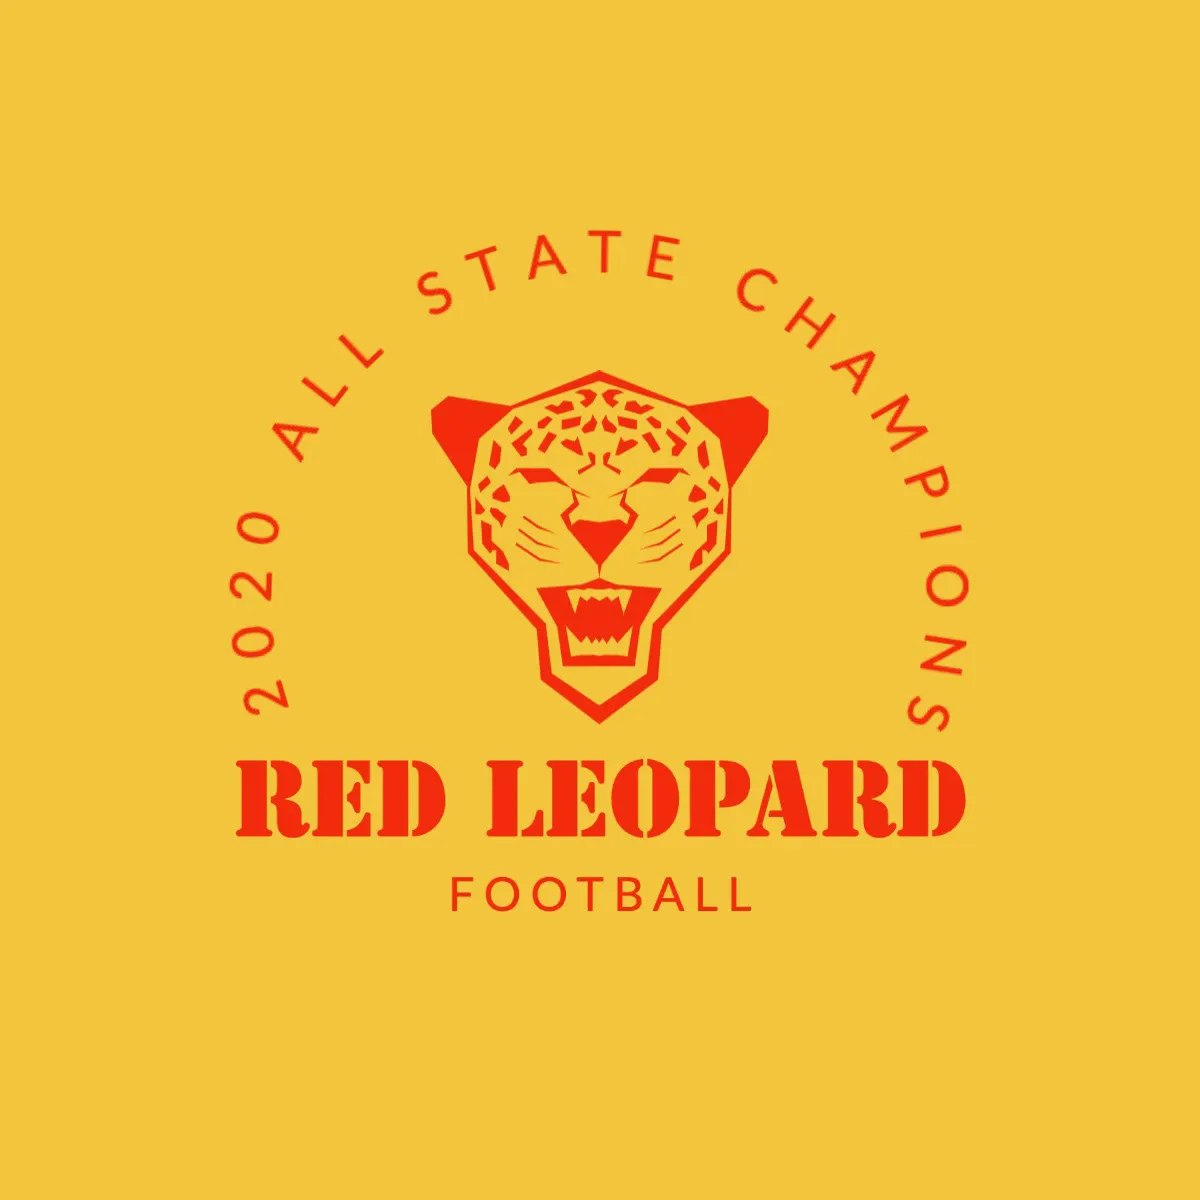 Red yellow red leopard football team logo